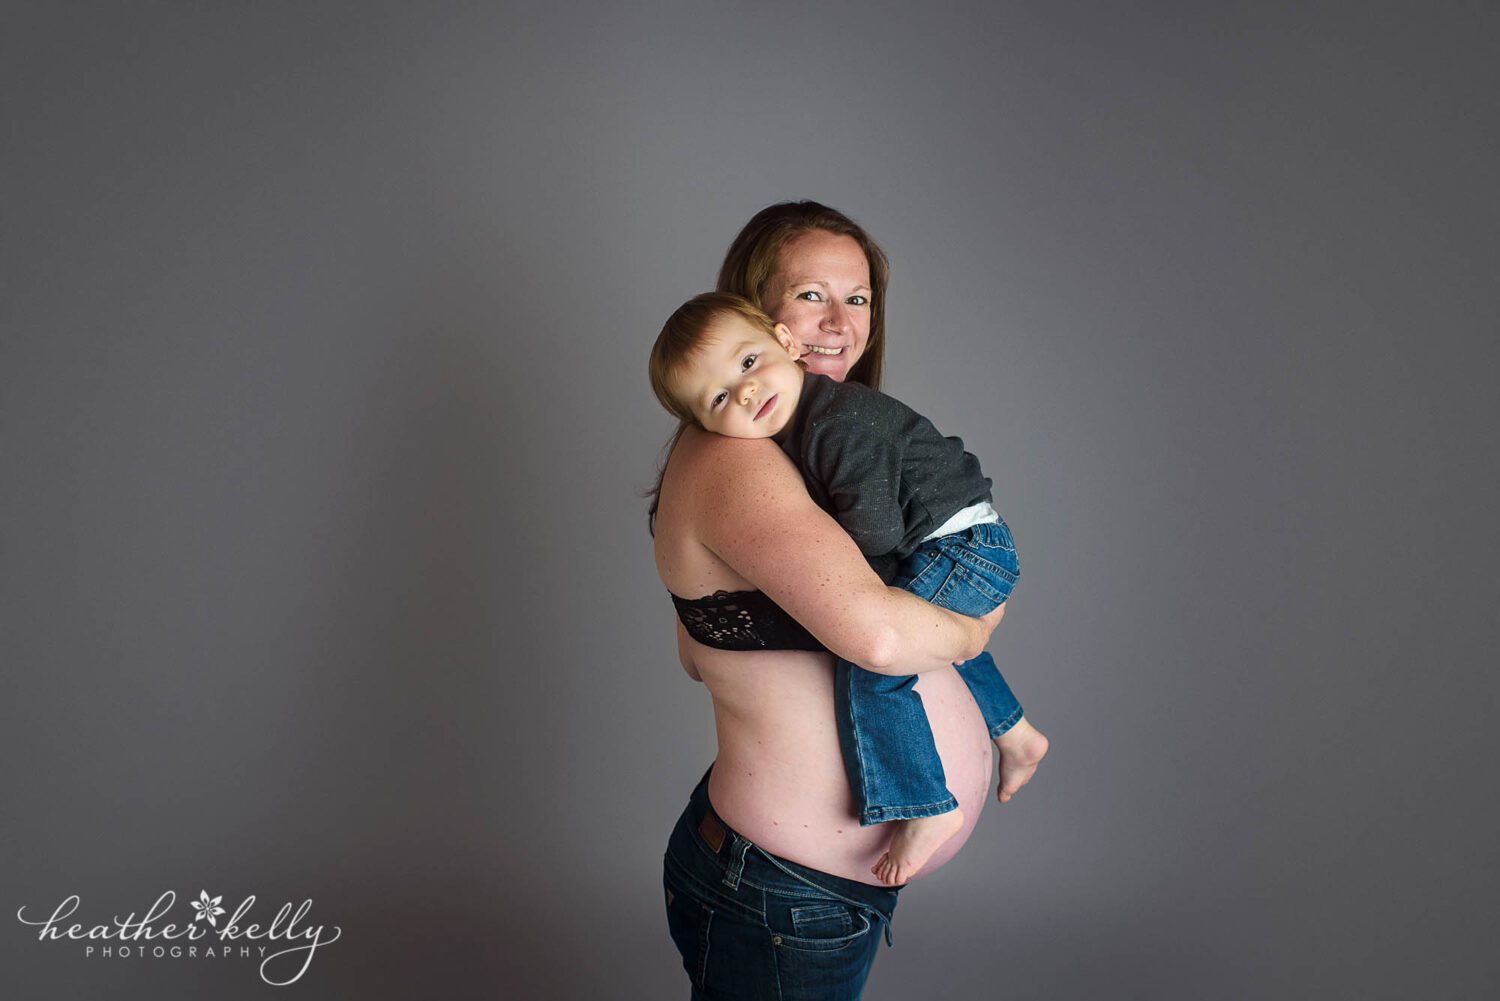 20 month old boy rests his head on his pregnant mom's shoulder. 

sandy hook maternity photography